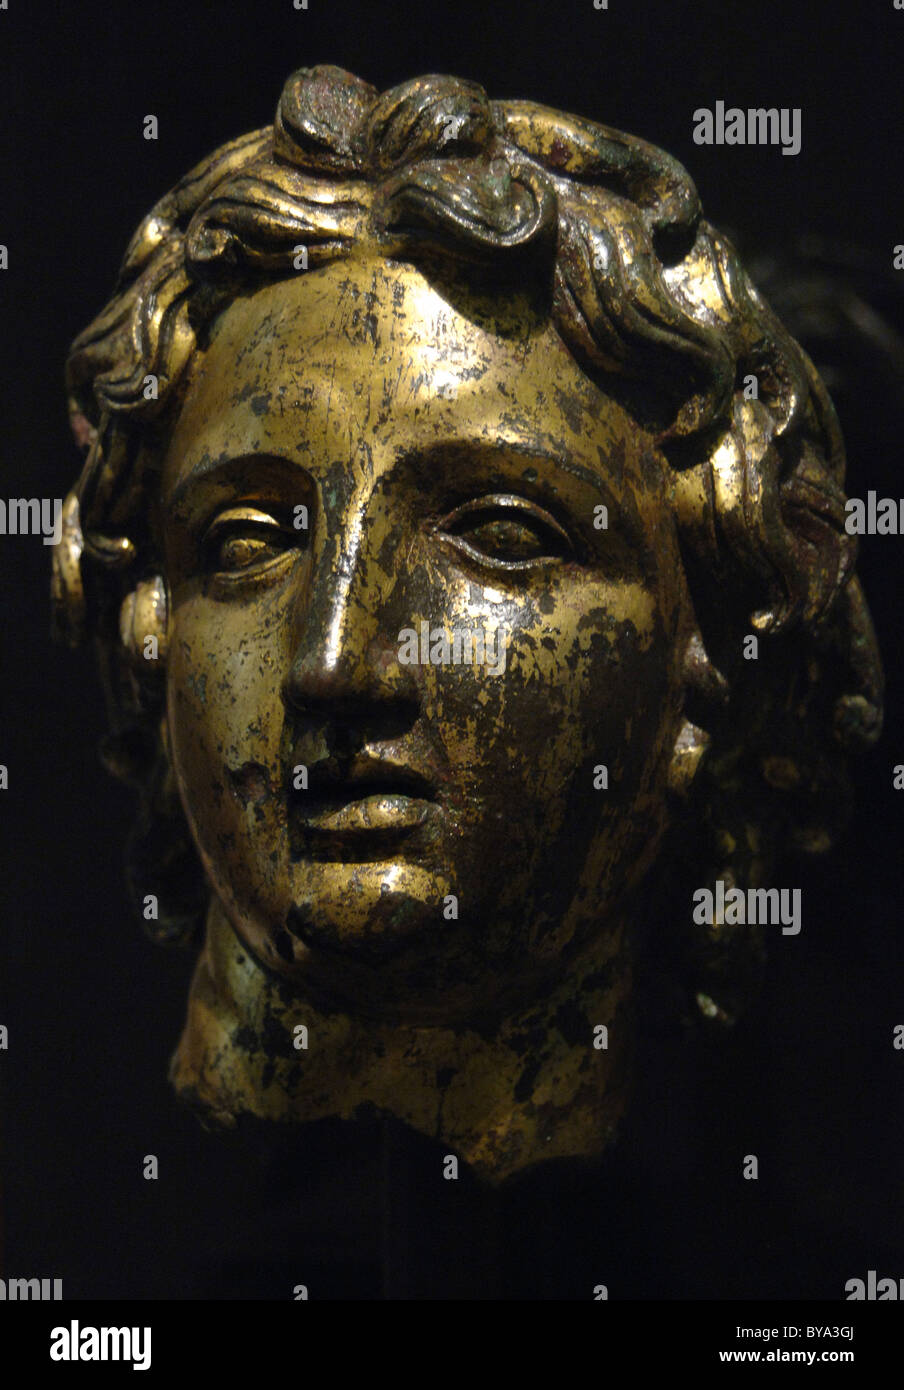 Alexander III the Great (-356-323). King of Macedonia (-336 to -323). Bronze bust in gold leaf. Stock Photo